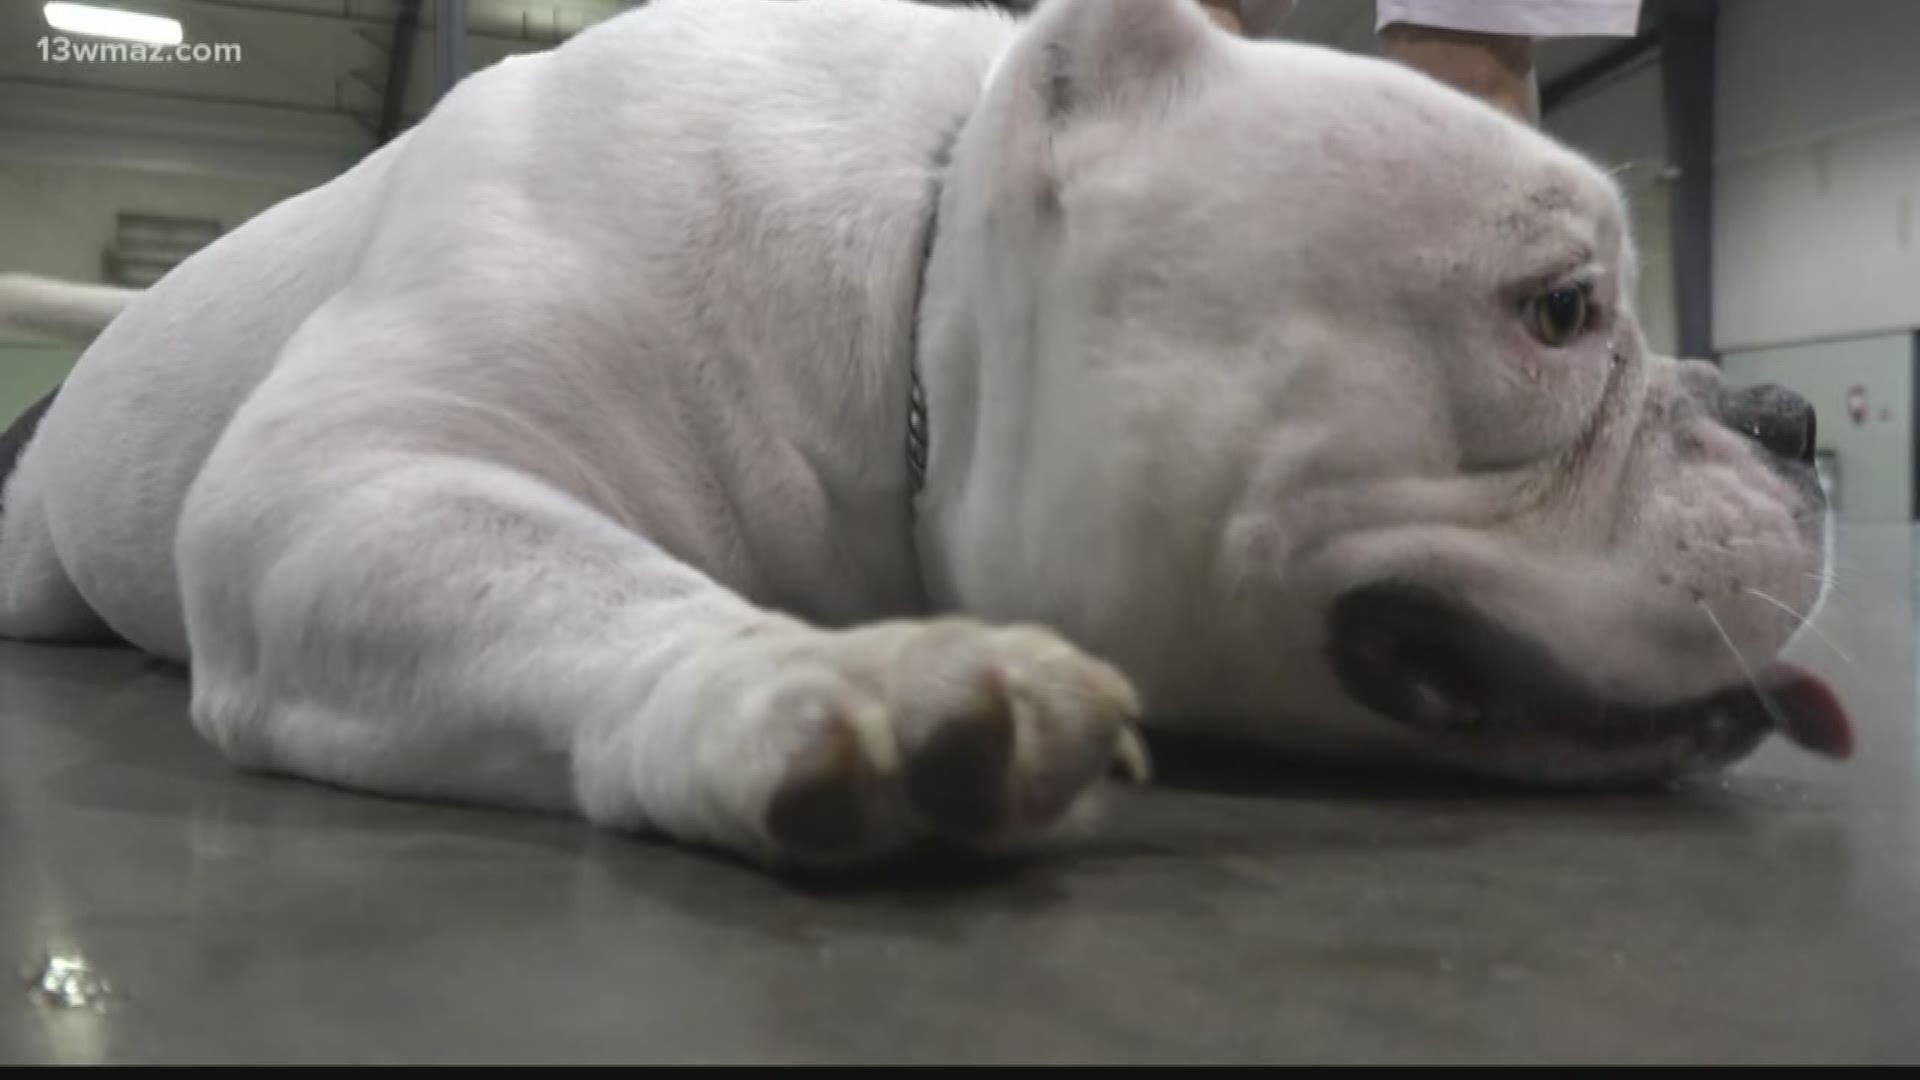 Sometimes pitbulls get a 'bad rap.' A group hosted an event at the Georgia National Fairgrounds in Perry to educate people about the American Pitbull Bully.